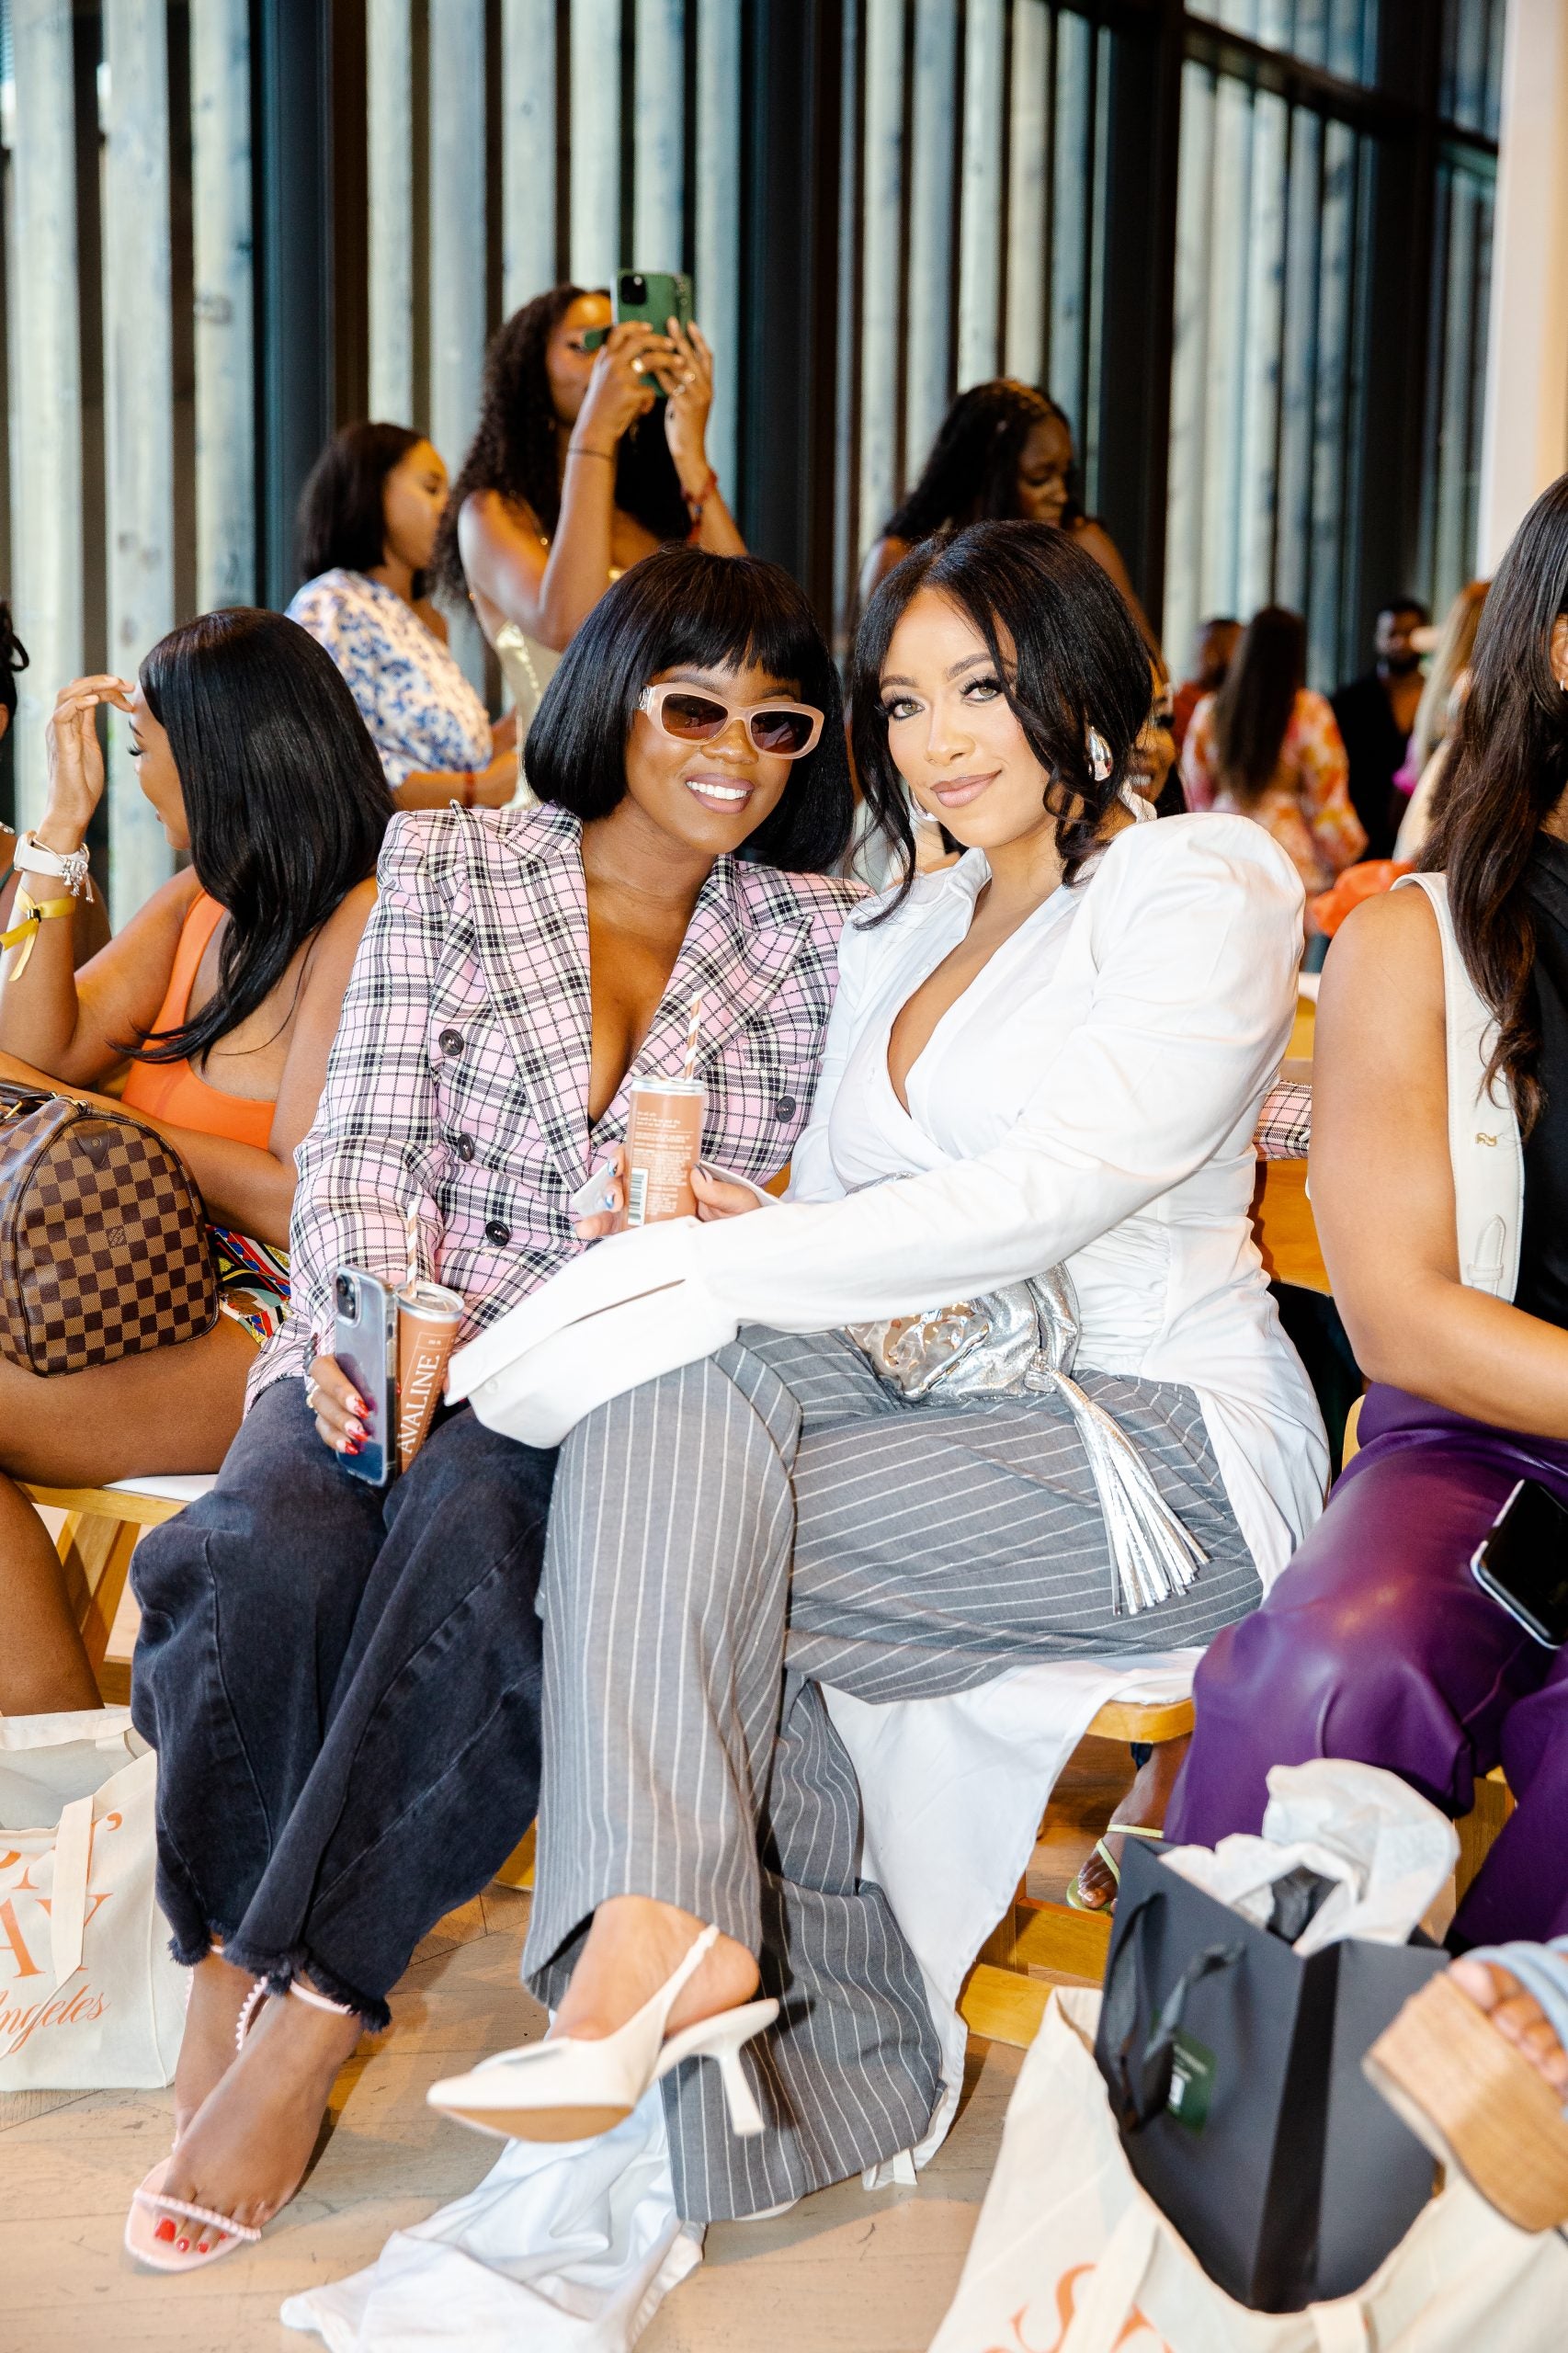 She Slays - Brunch and Slay - Lifestyle and Connections